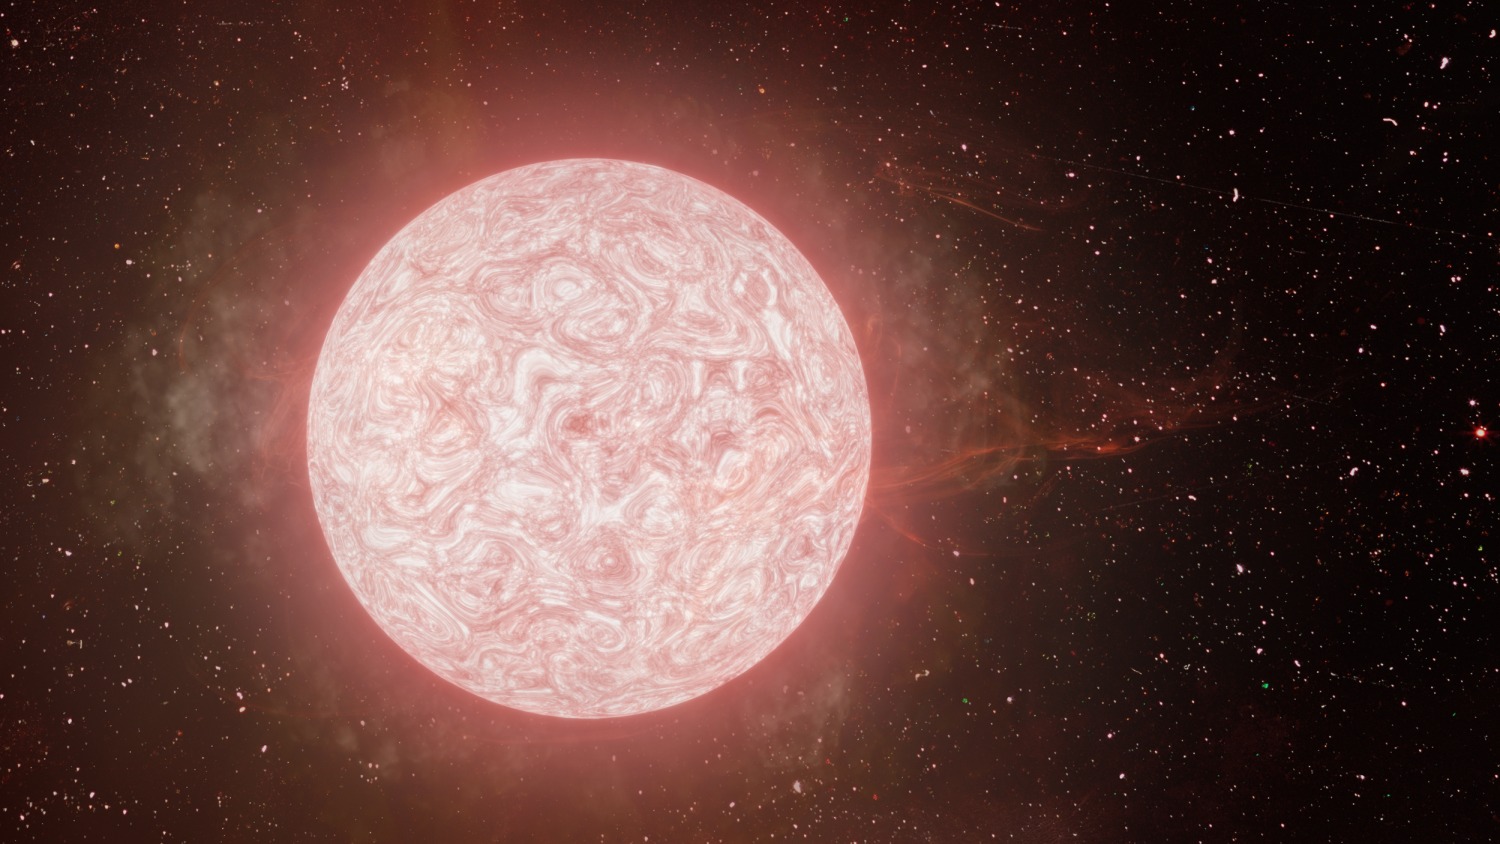 What is the largest known star in the universe? It's a red hypergiant.